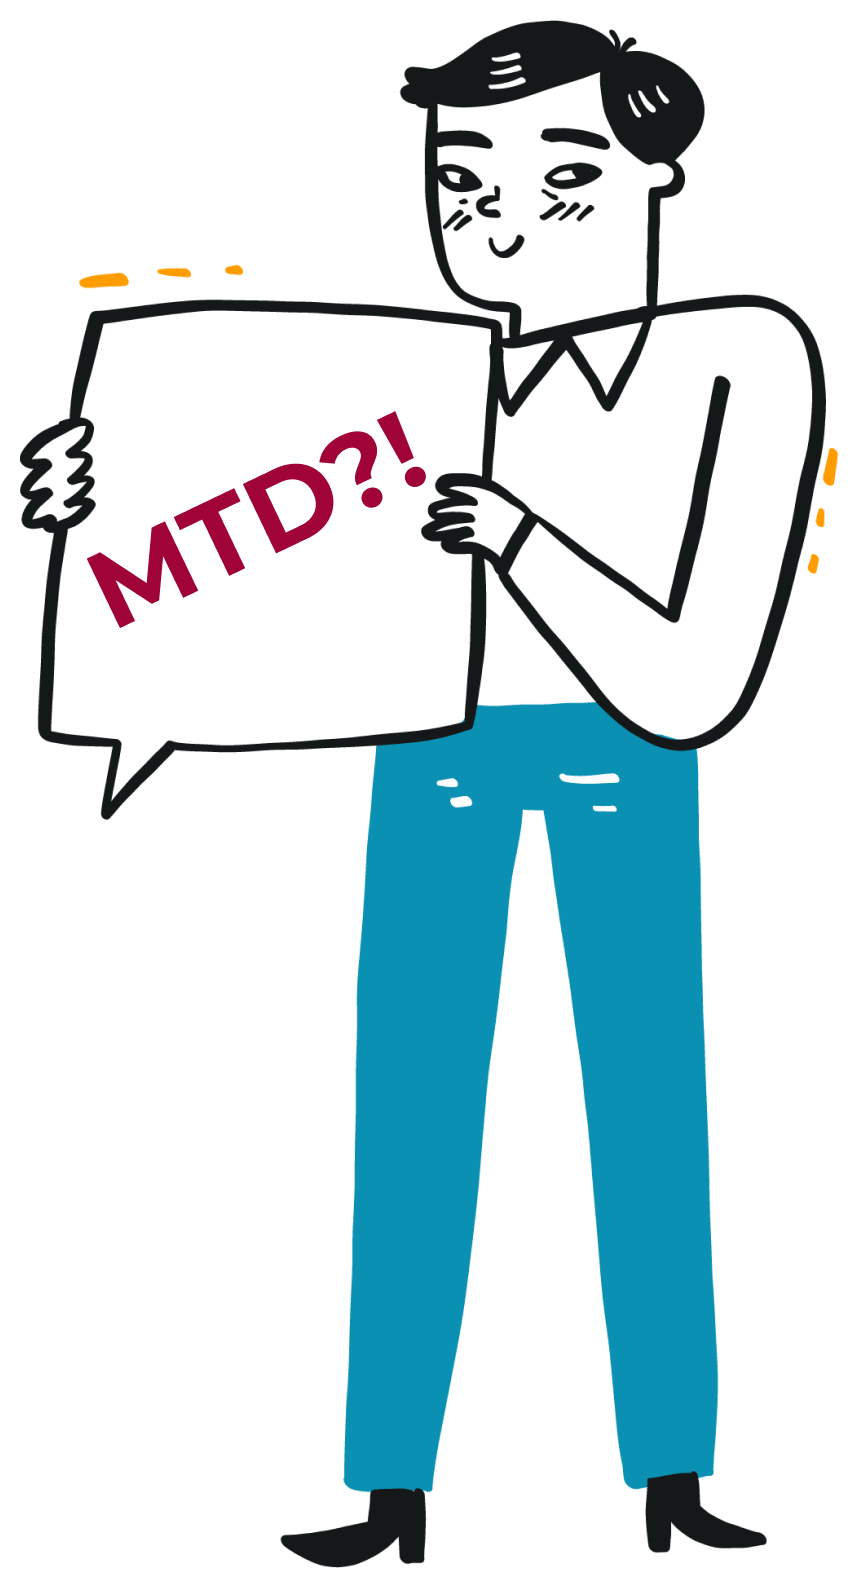 What is MTD?